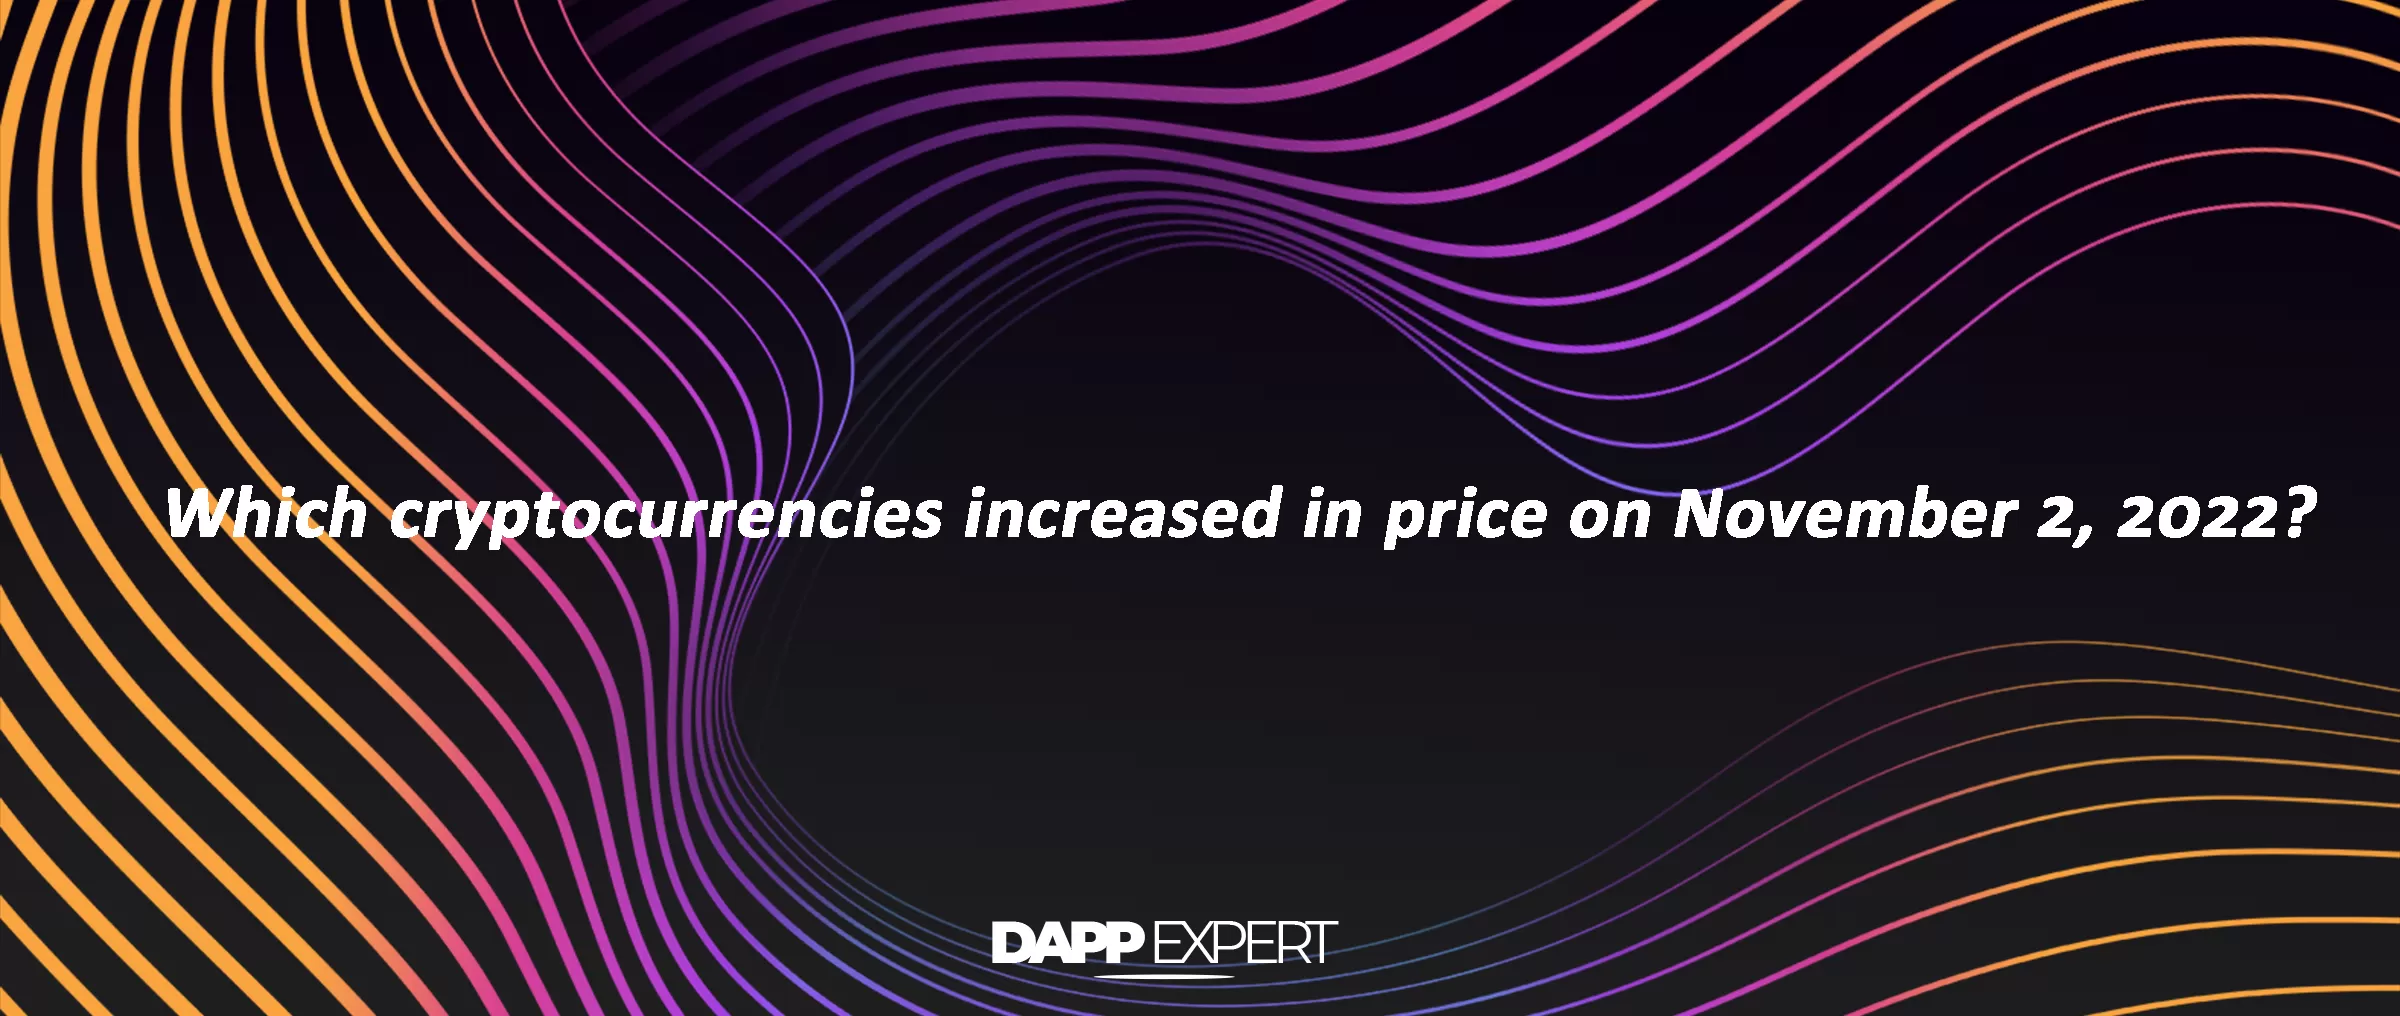 Which cryptocurrencies increased in price on November 2, 2022?